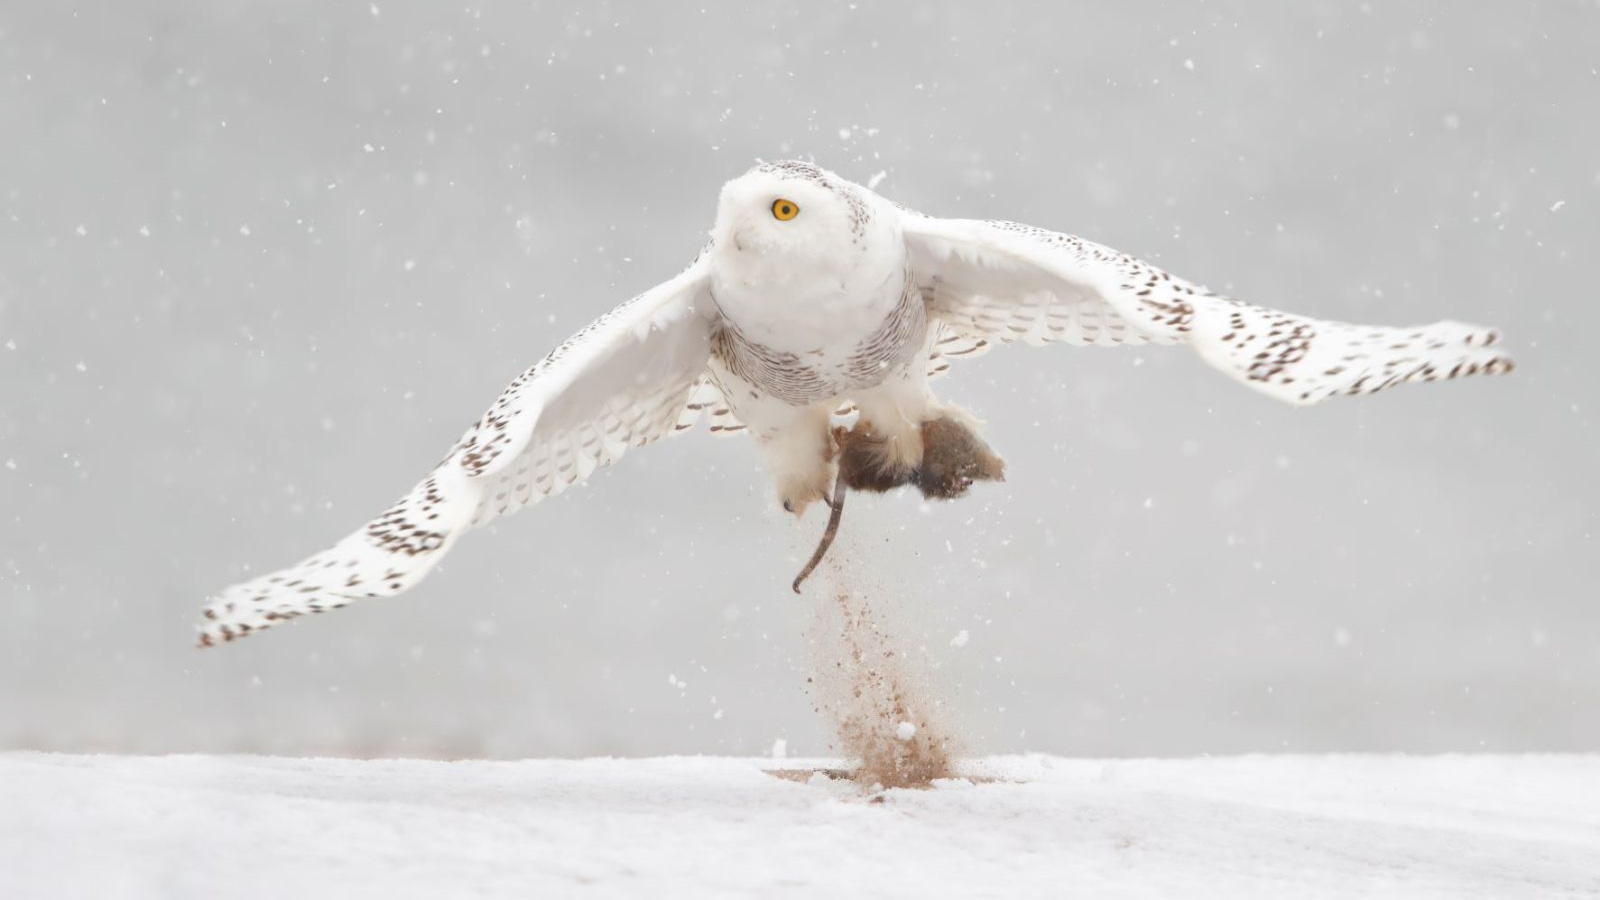 Photo: A Snowy Owl catches a rodent. Credit: Isaac Grant